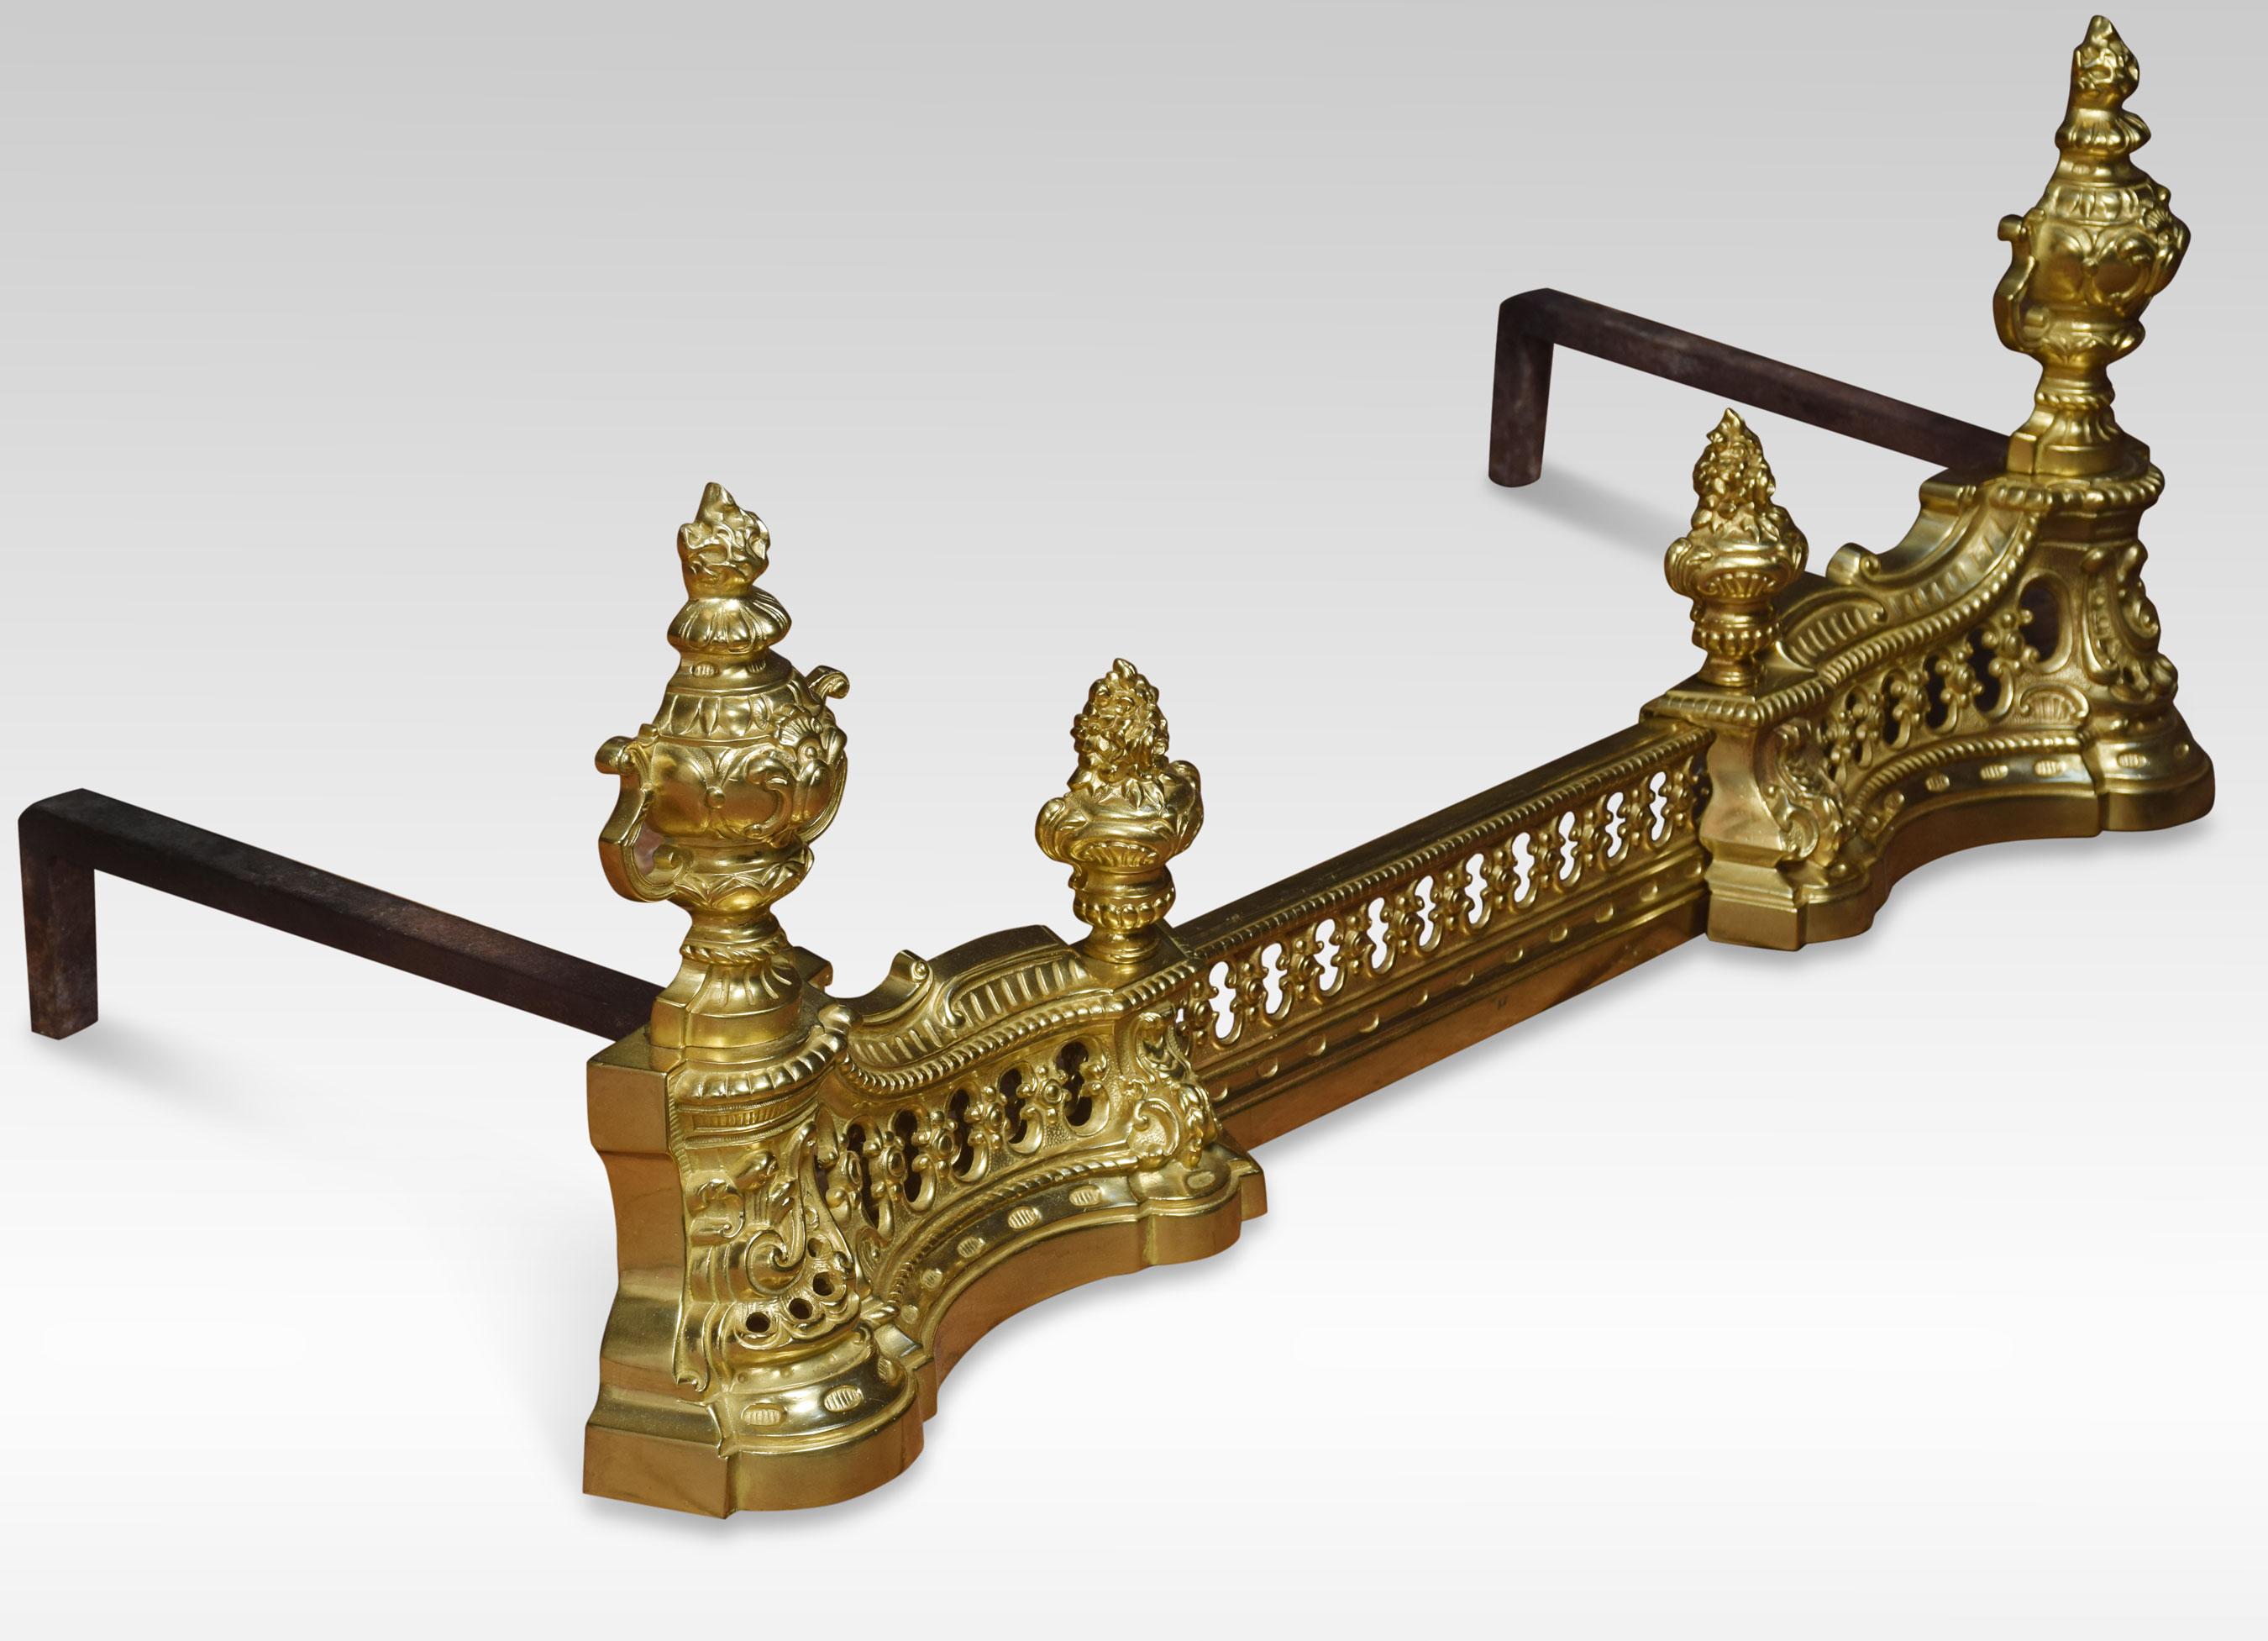 A 19th century French gilt-brass fender, the extending pierced gallery surmounted to each end with vase finials above serpentine bases.
Dimensions
Height 13 inches
Width 27.5 inches adjustable to 46 inches
Depth 15 inches.